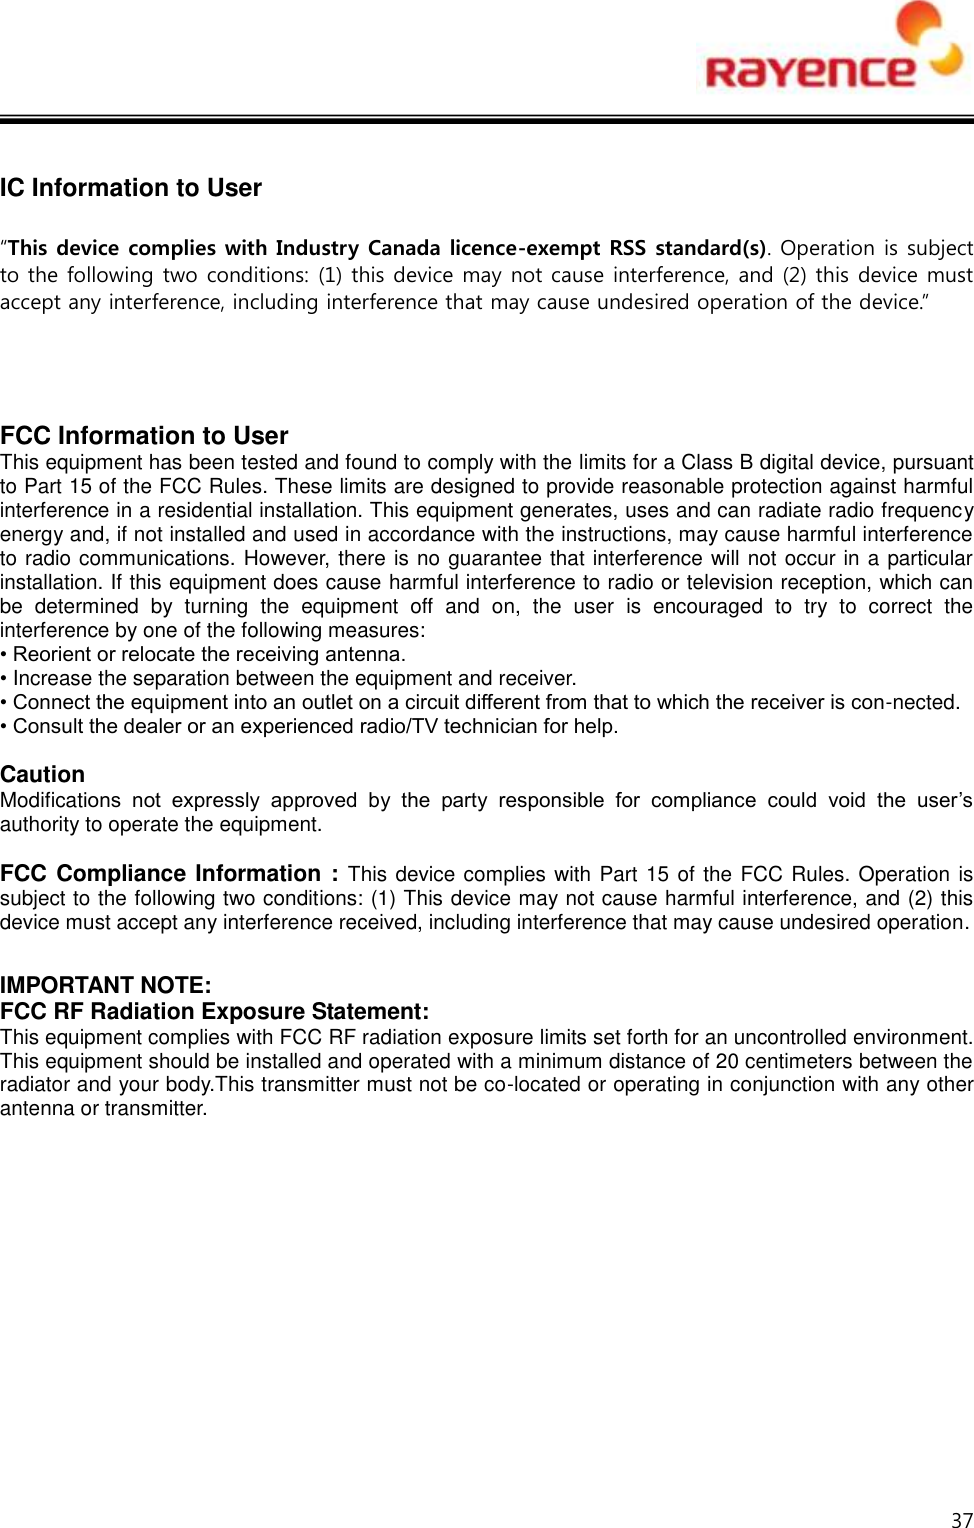  37   IC Information to User  “This device complies with Industry Canada licence-exempt RSS standard(s). Operation is subject to the following two conditions: (1) this device may not cause interference, and (2) this device must accept any interference, including interference that may cause undesired operation of the device.”      FCC Information to User This equipment has been tested and found to comply with the limits for a Class B digital device, pursuant to Part 15 of the FCC Rules. These limits are designed to provide reasonable protection against harmful interference in a residential installation. This equipment generates, uses and can radiate radio frequency energy and, if not installed and used in accordance with the instructions, may cause harmful interference to radio communications. However, there is no guarantee that interference will not occur in a particular installation. If this equipment does cause harmful interference to radio or television reception, which can be  determined  by  turning  the  equipment  off  and  on,  the  user  is  encouraged  to  try  to  correct  the interference by one of the following measures: • Reorient or relocate the receiving antenna. • Increase the separation between the equipment and receiver. • Connect the equipment into an outlet on a circuit different from that to which the receiver is con-nected. • Consult the dealer or an experienced radio/TV technician for help.  Caution Modifications  not  expressly  approved  by  the  party  responsible  for  compliance  could  void  the  user’s authority to operate the equipment.  FCC Compliance Information : This device complies with Part 15 of the FCC Rules. Operation is subject to the following two conditions: (1) This device may not cause harmful interference, and (2) this device must accept any interference received, including interference that may cause undesired operation.  IMPORTANT NOTE: FCC RF Radiation Exposure Statement: This equipment complies with FCC RF radiation exposure limits set forth for an uncontrolled environment. This equipment should be installed and operated with a minimum distance of 20 centimeters between the radiator and your body.This transmitter must not be co-located or operating in conjunction with any other antenna or transmitter.           